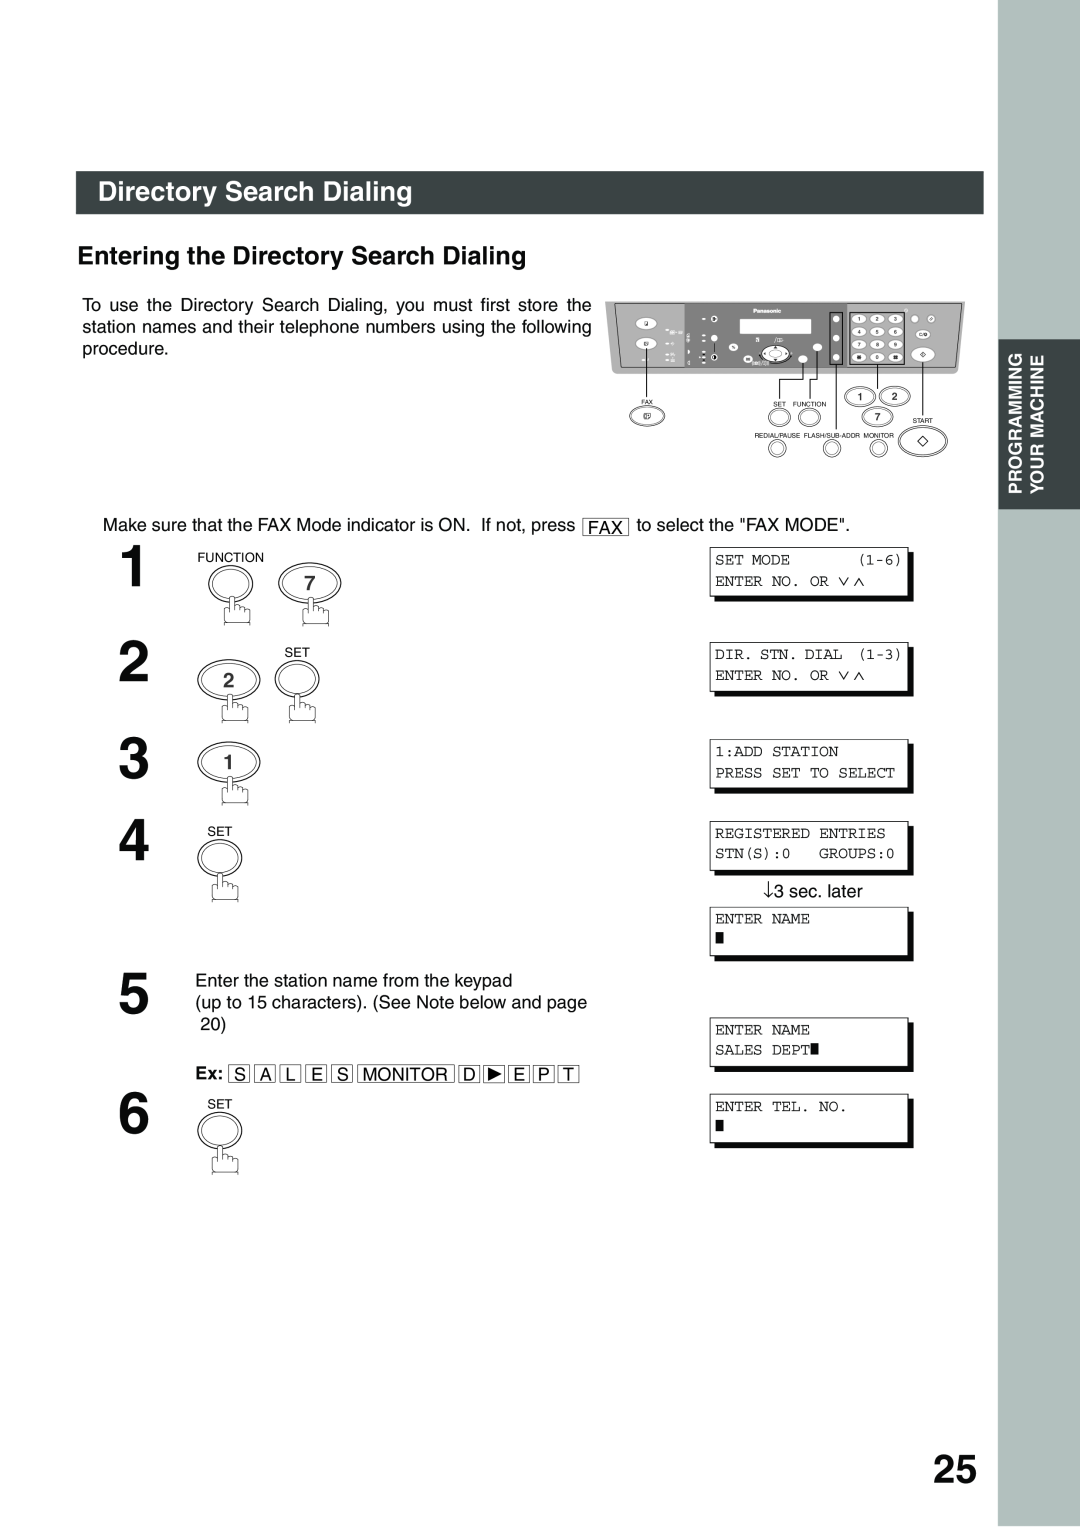 Panasonic DP-135FP appendix Entering the Directory Search Dialing 